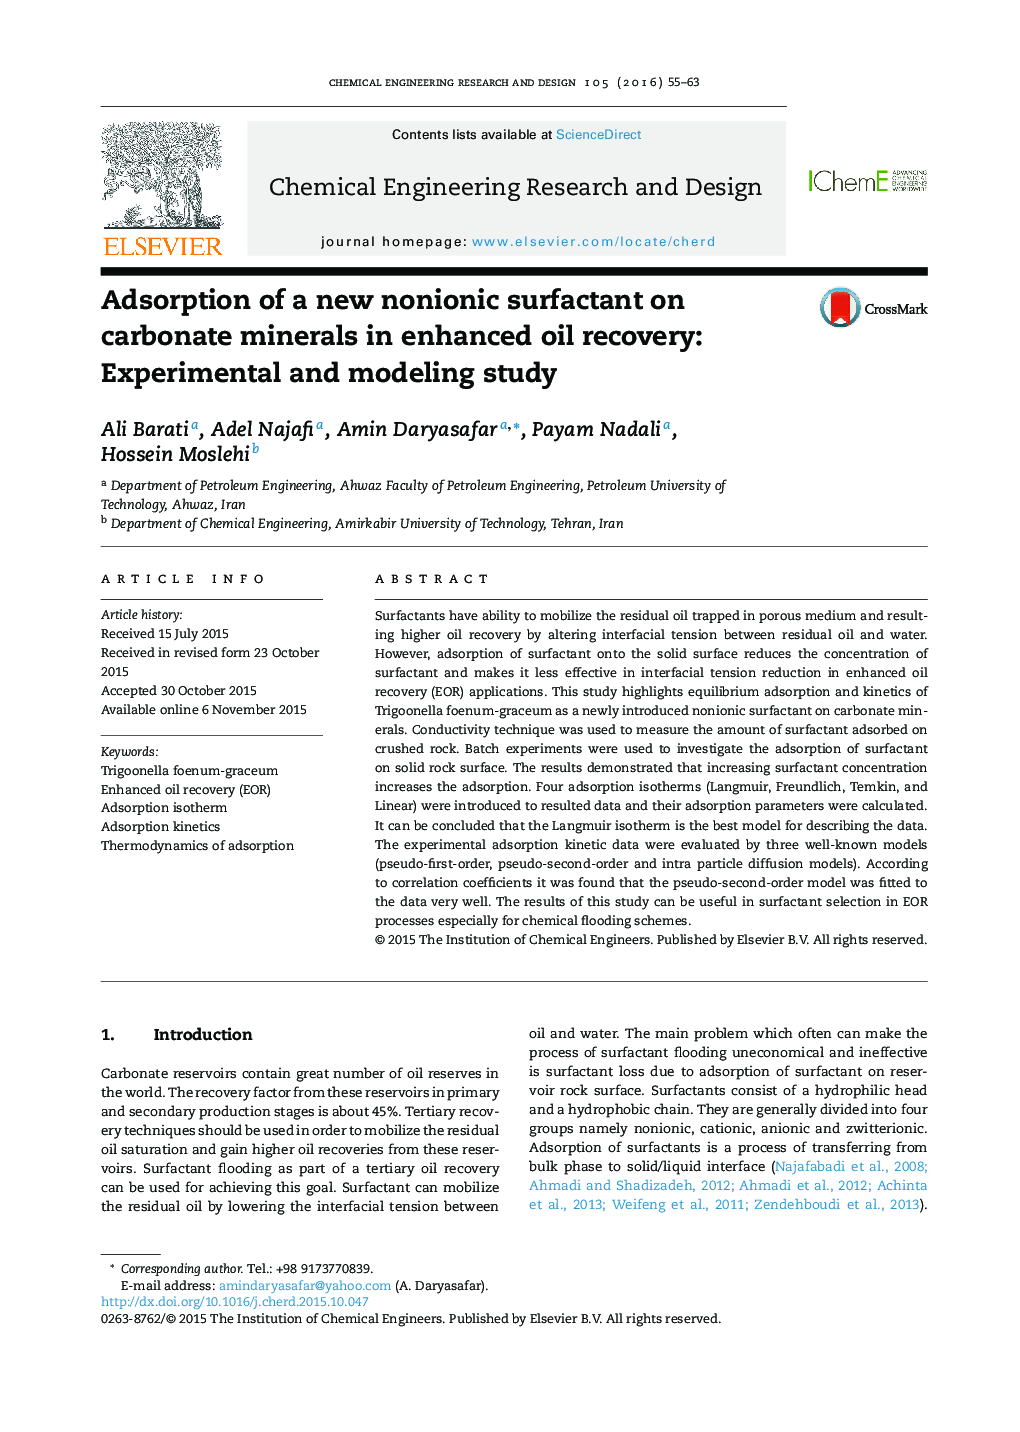 Adsorption of a new nonionic surfactant on carbonate minerals in enhanced oil recovery: Experimental and modeling study